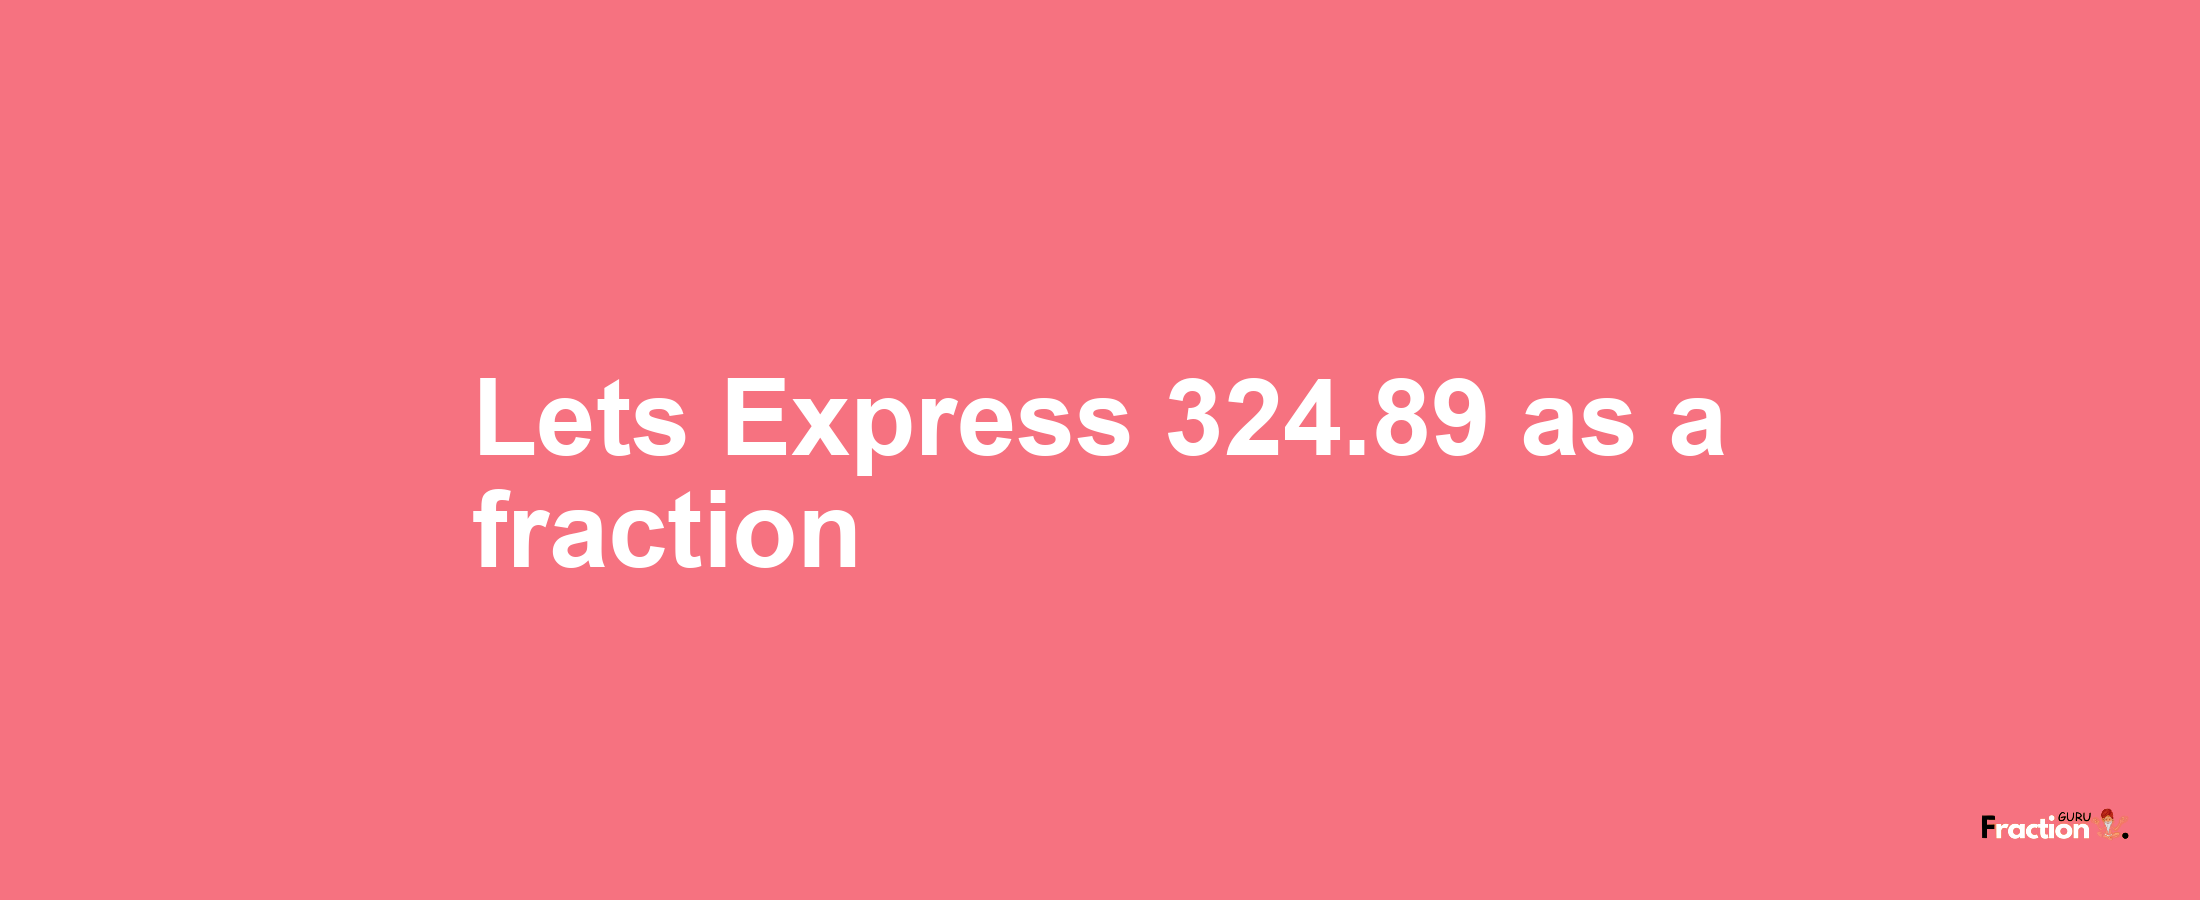 Lets Express 324.89 as afraction